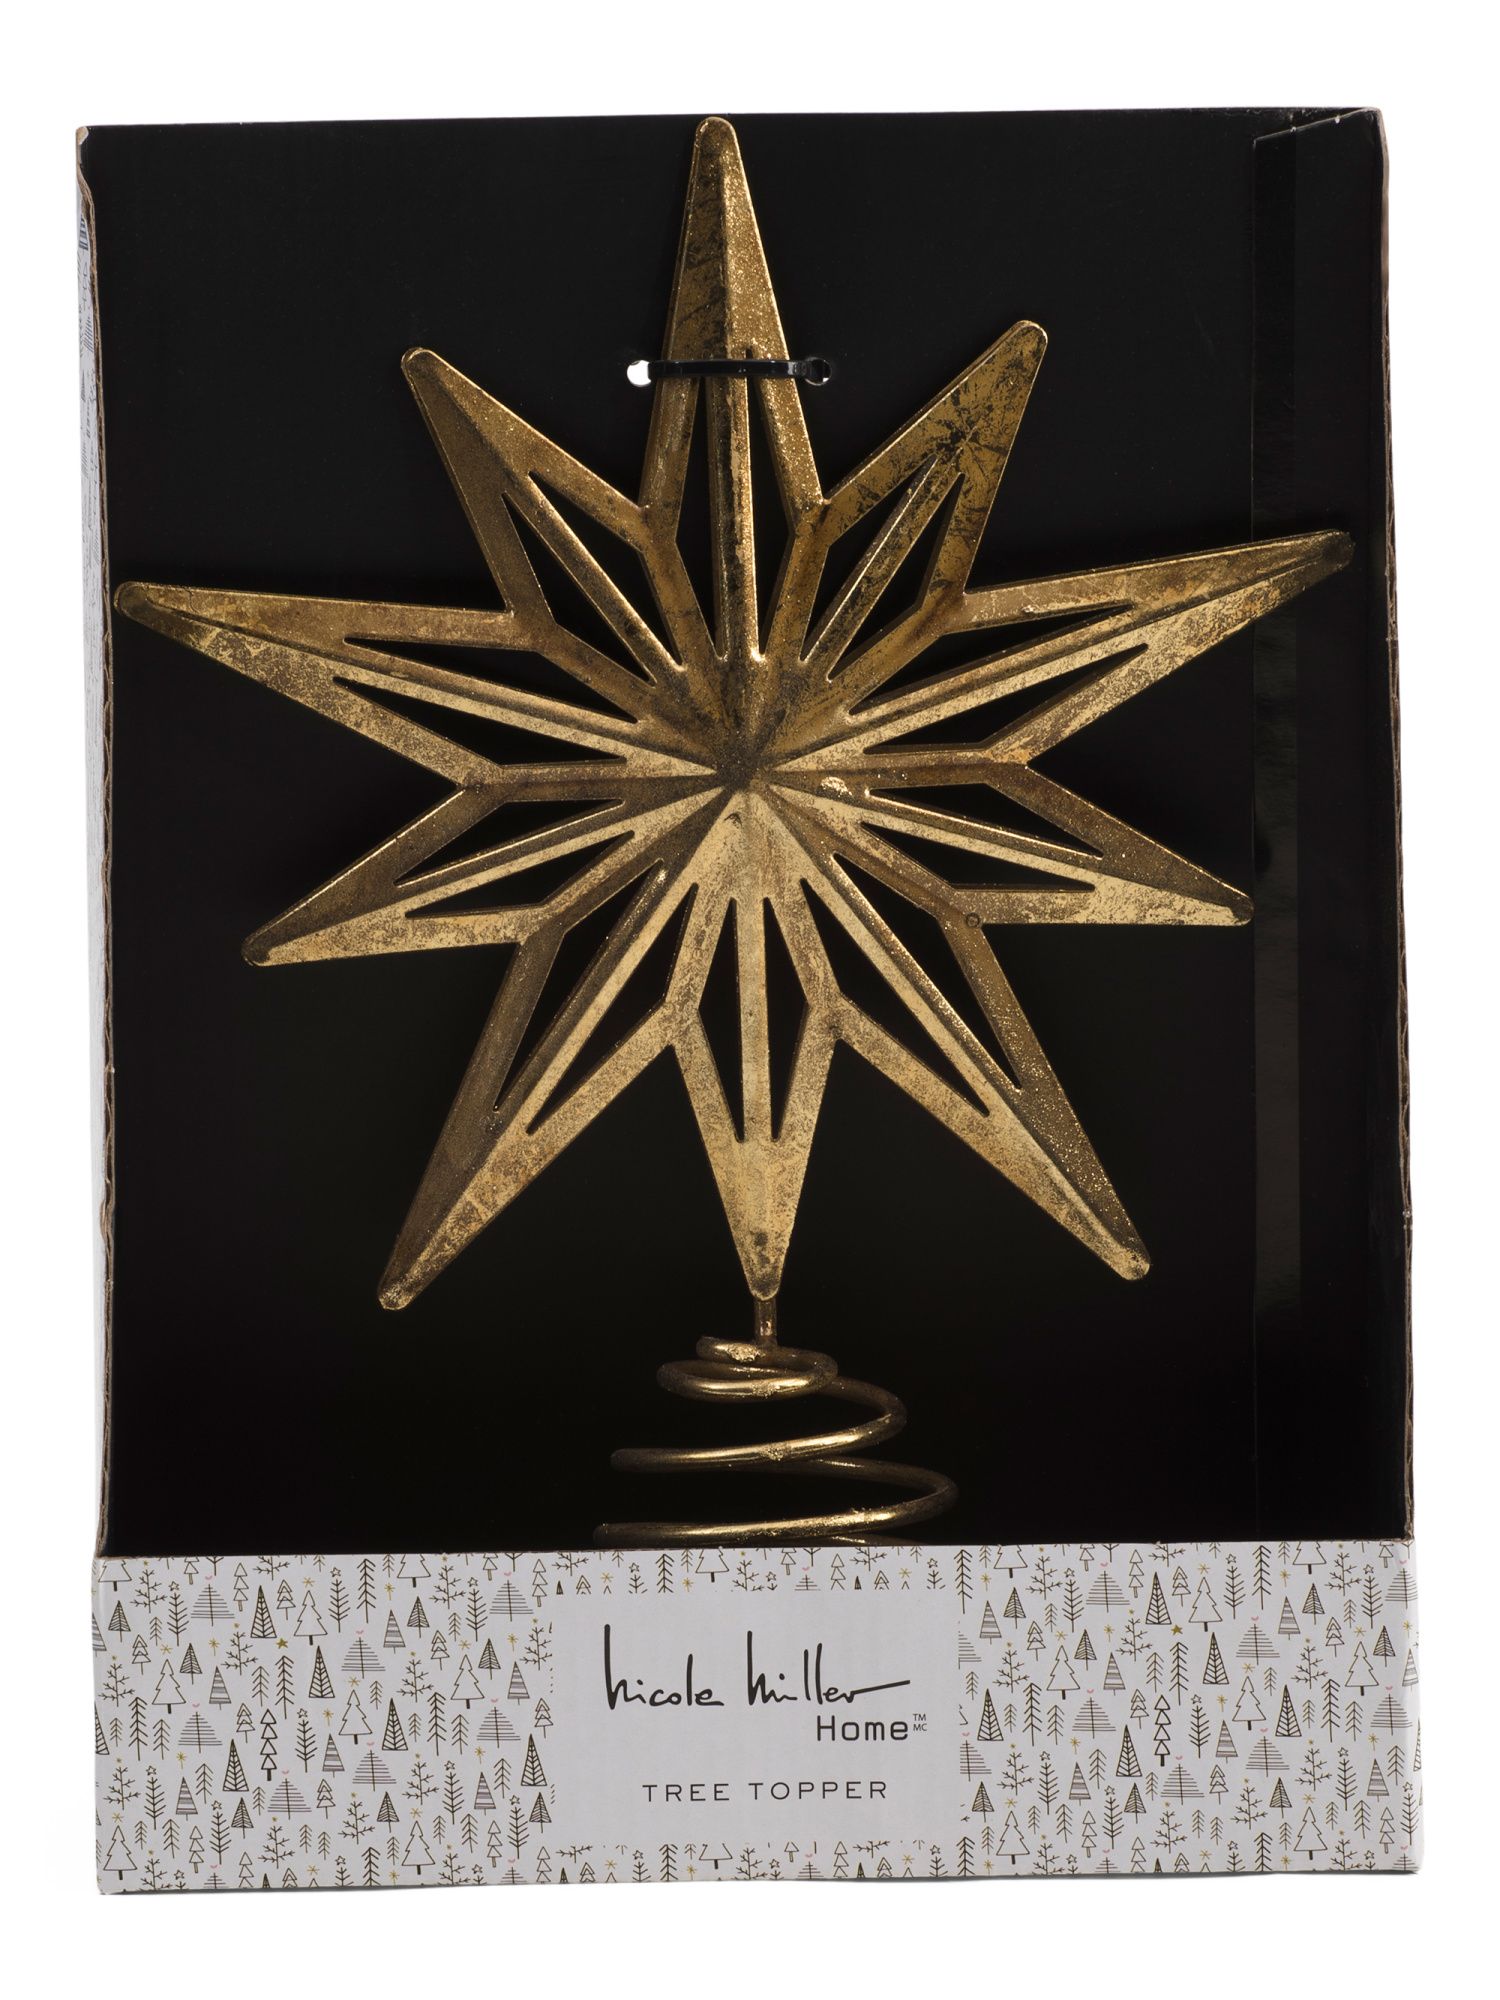 NICOLE MILLER HOME
							
							10.5in Metal Star Tree Topper
						
						
							

	
		
					... | Marshalls